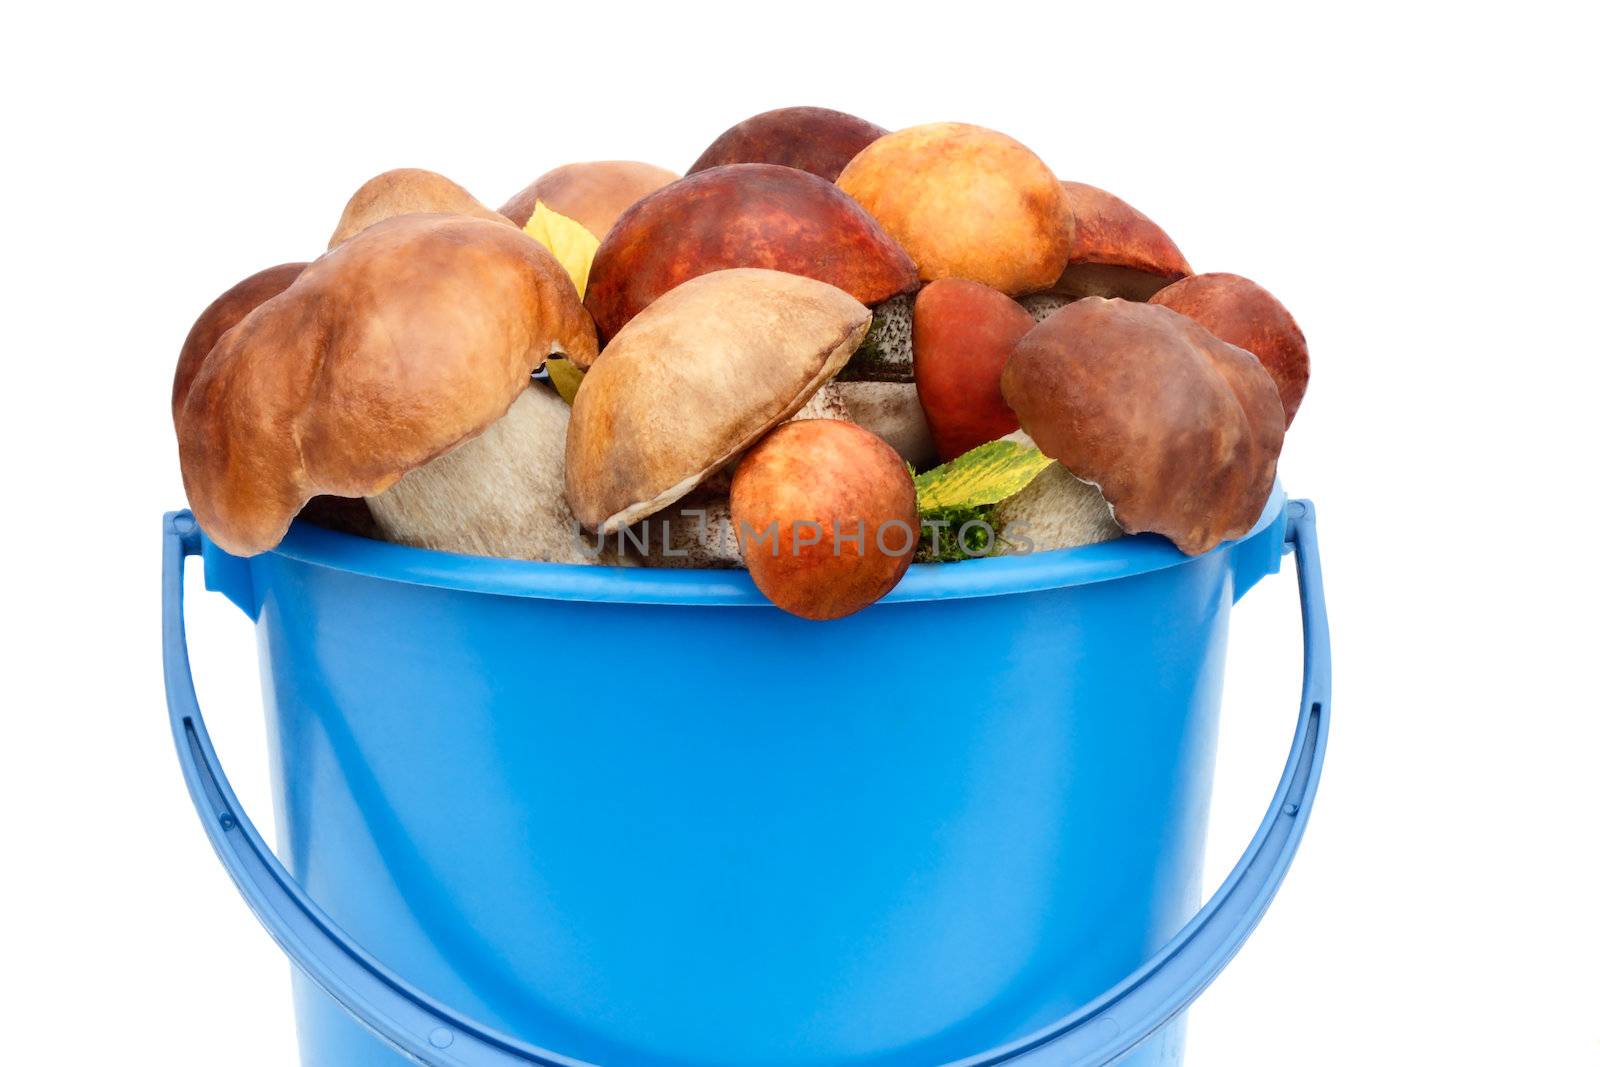 
Mushrooms of different varieties are in the blue bucket. Presented on a white background.